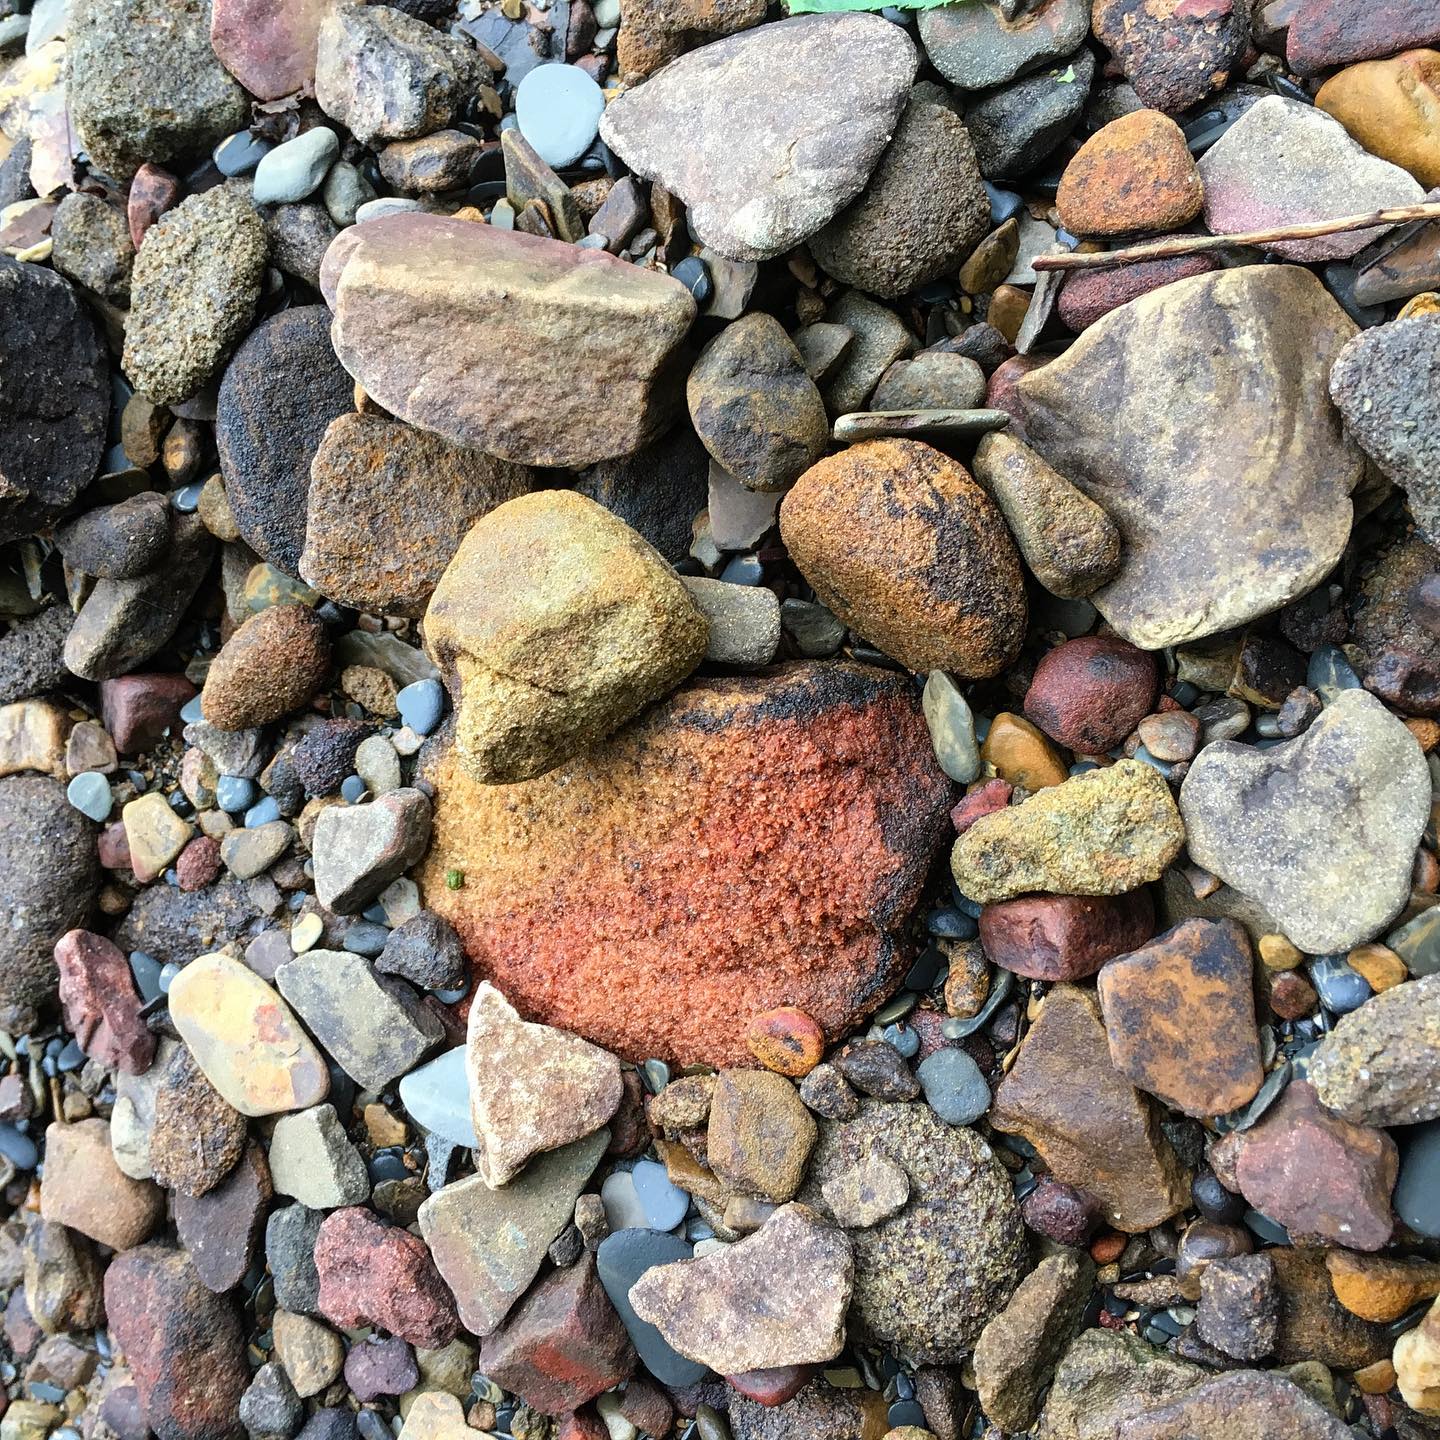 This rock will make a great pigment.